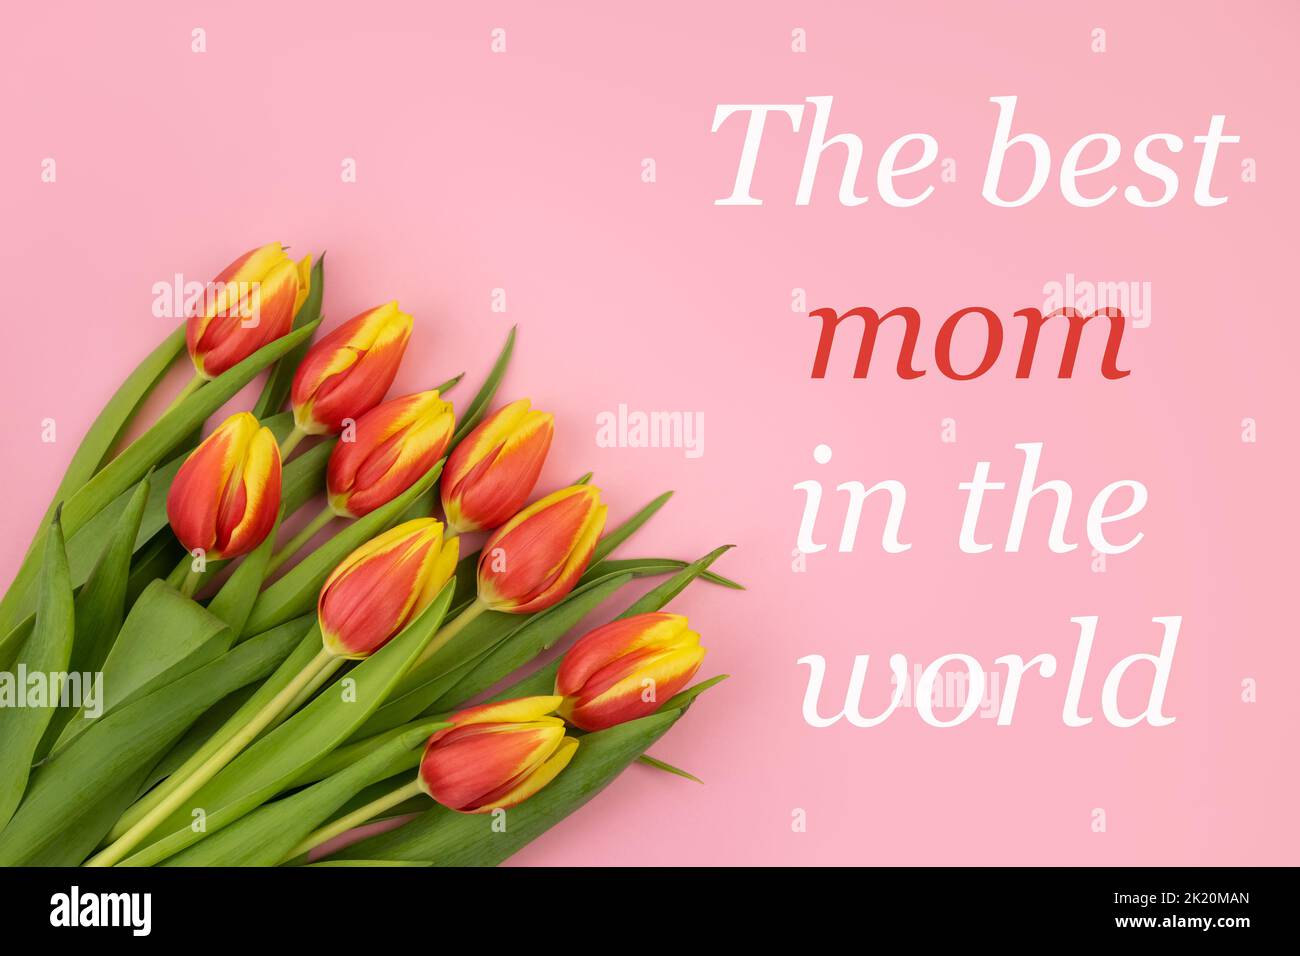 50+ Worlds Best Mom Stock Photos, Pictures & Royalty-Free Images